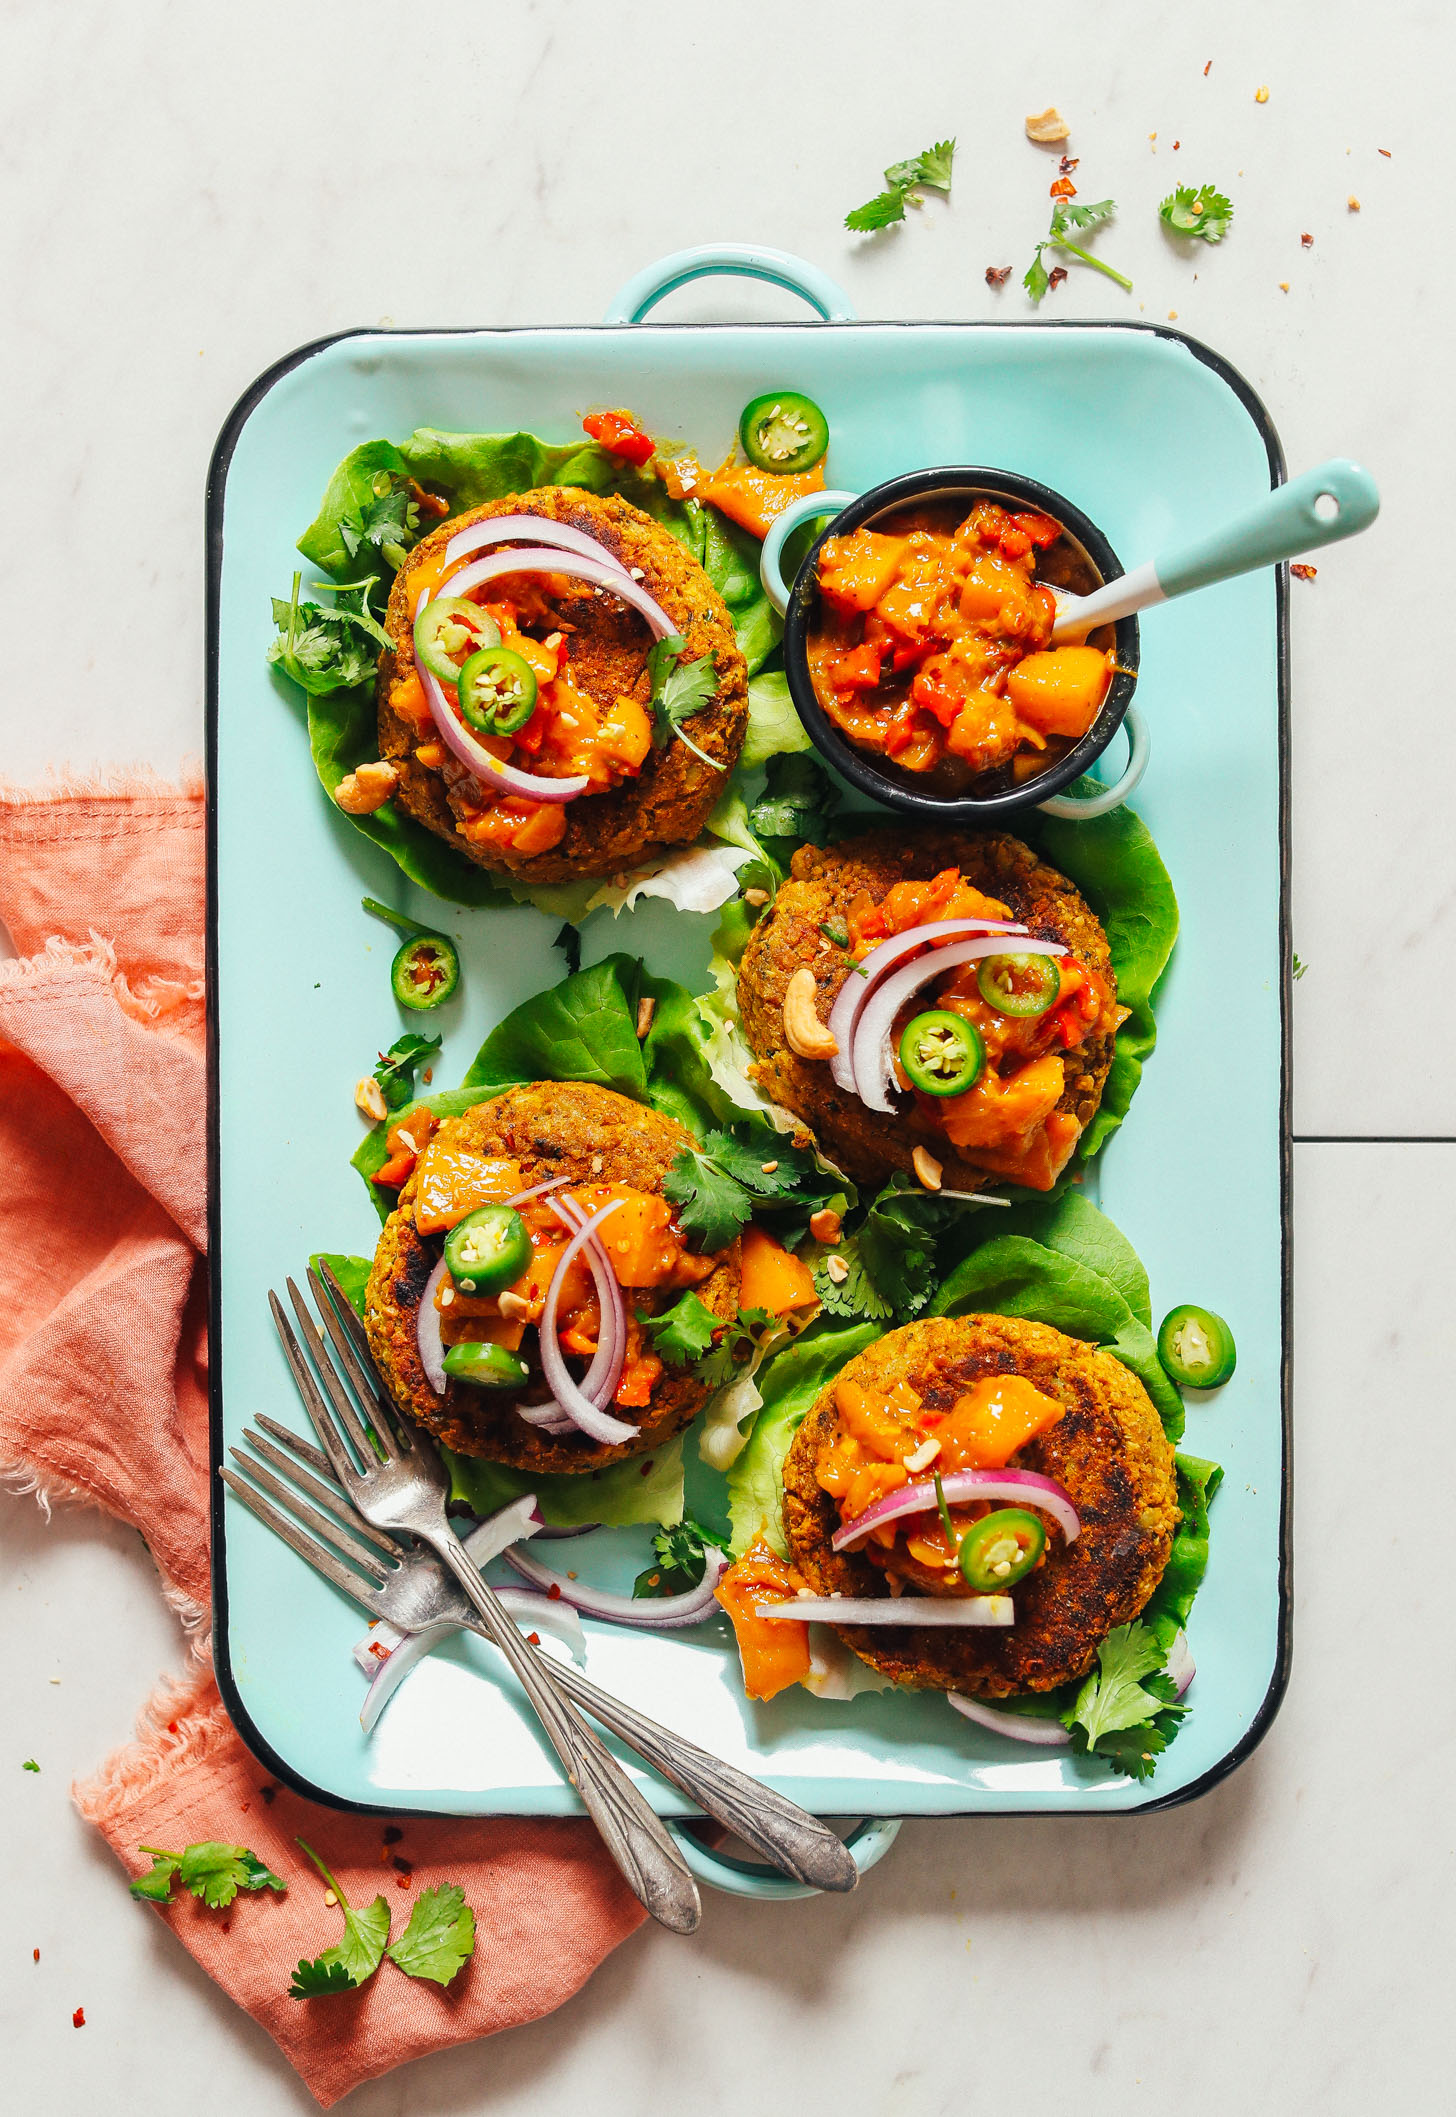 Platter filled with delicious Curried Chickpea Burgers on butter lettuce leaves